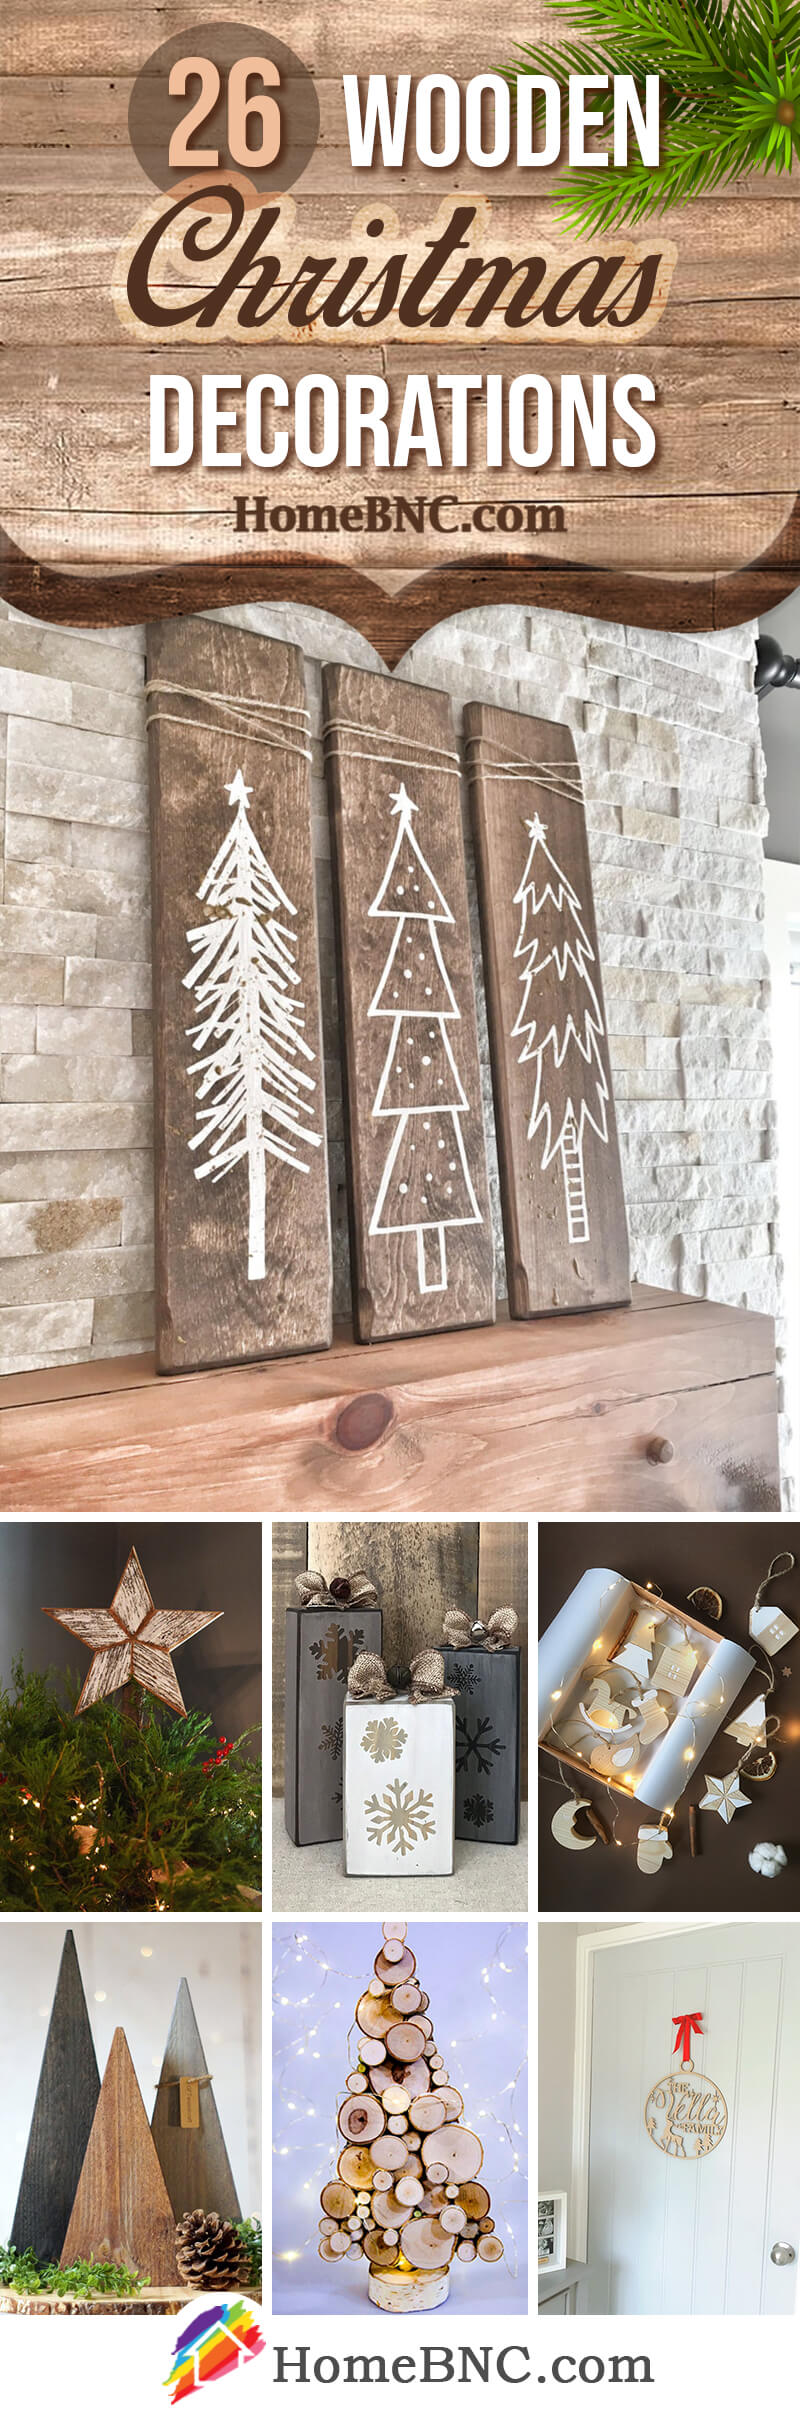 Christmas decorations from wood